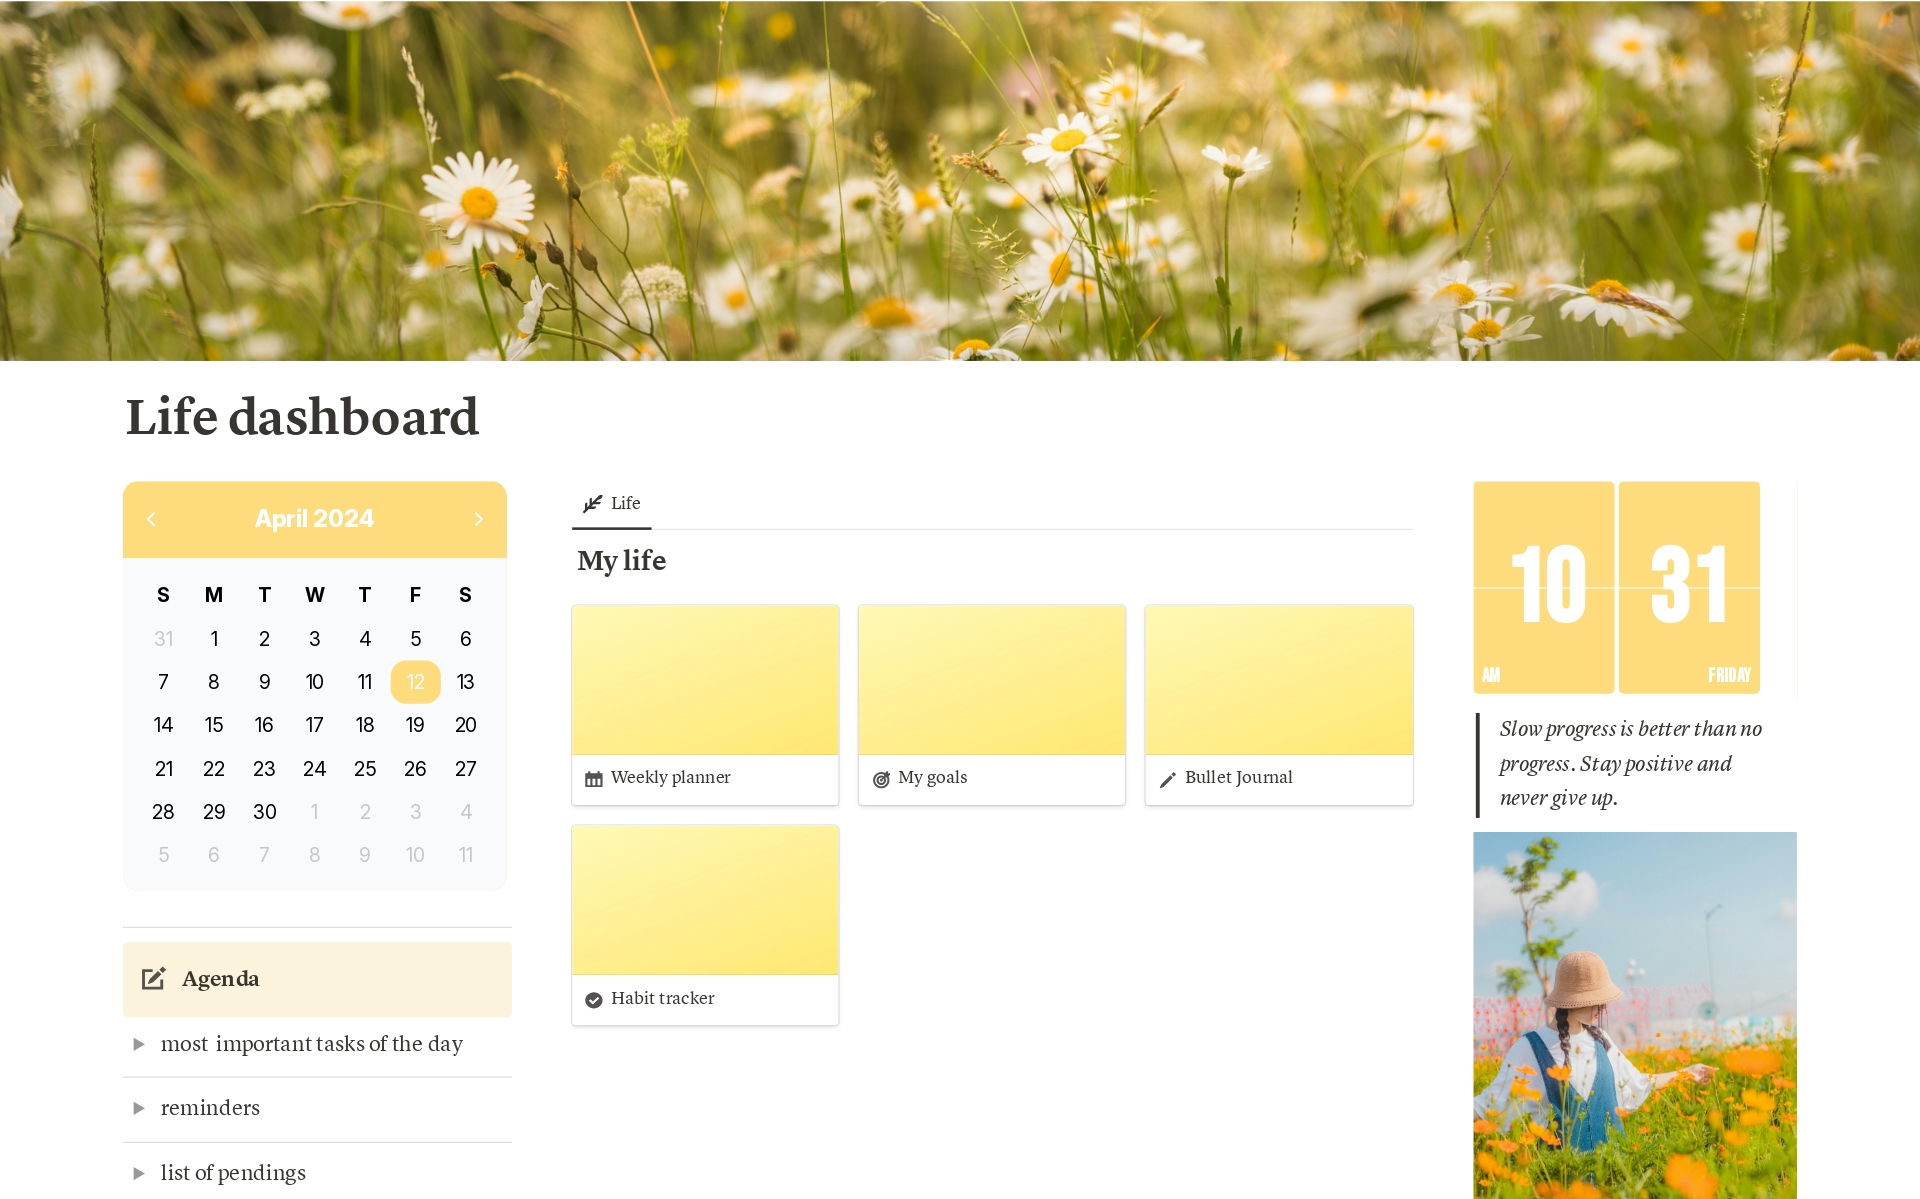 Organize your life efficiently with my Notion dashboard: weekly planner, goal setting, bullet journal, and habit tracking all in one place! Stay on top of your tasks and aspirations effortlessly. Use this place for planning your life and becoming a better version of yourself.